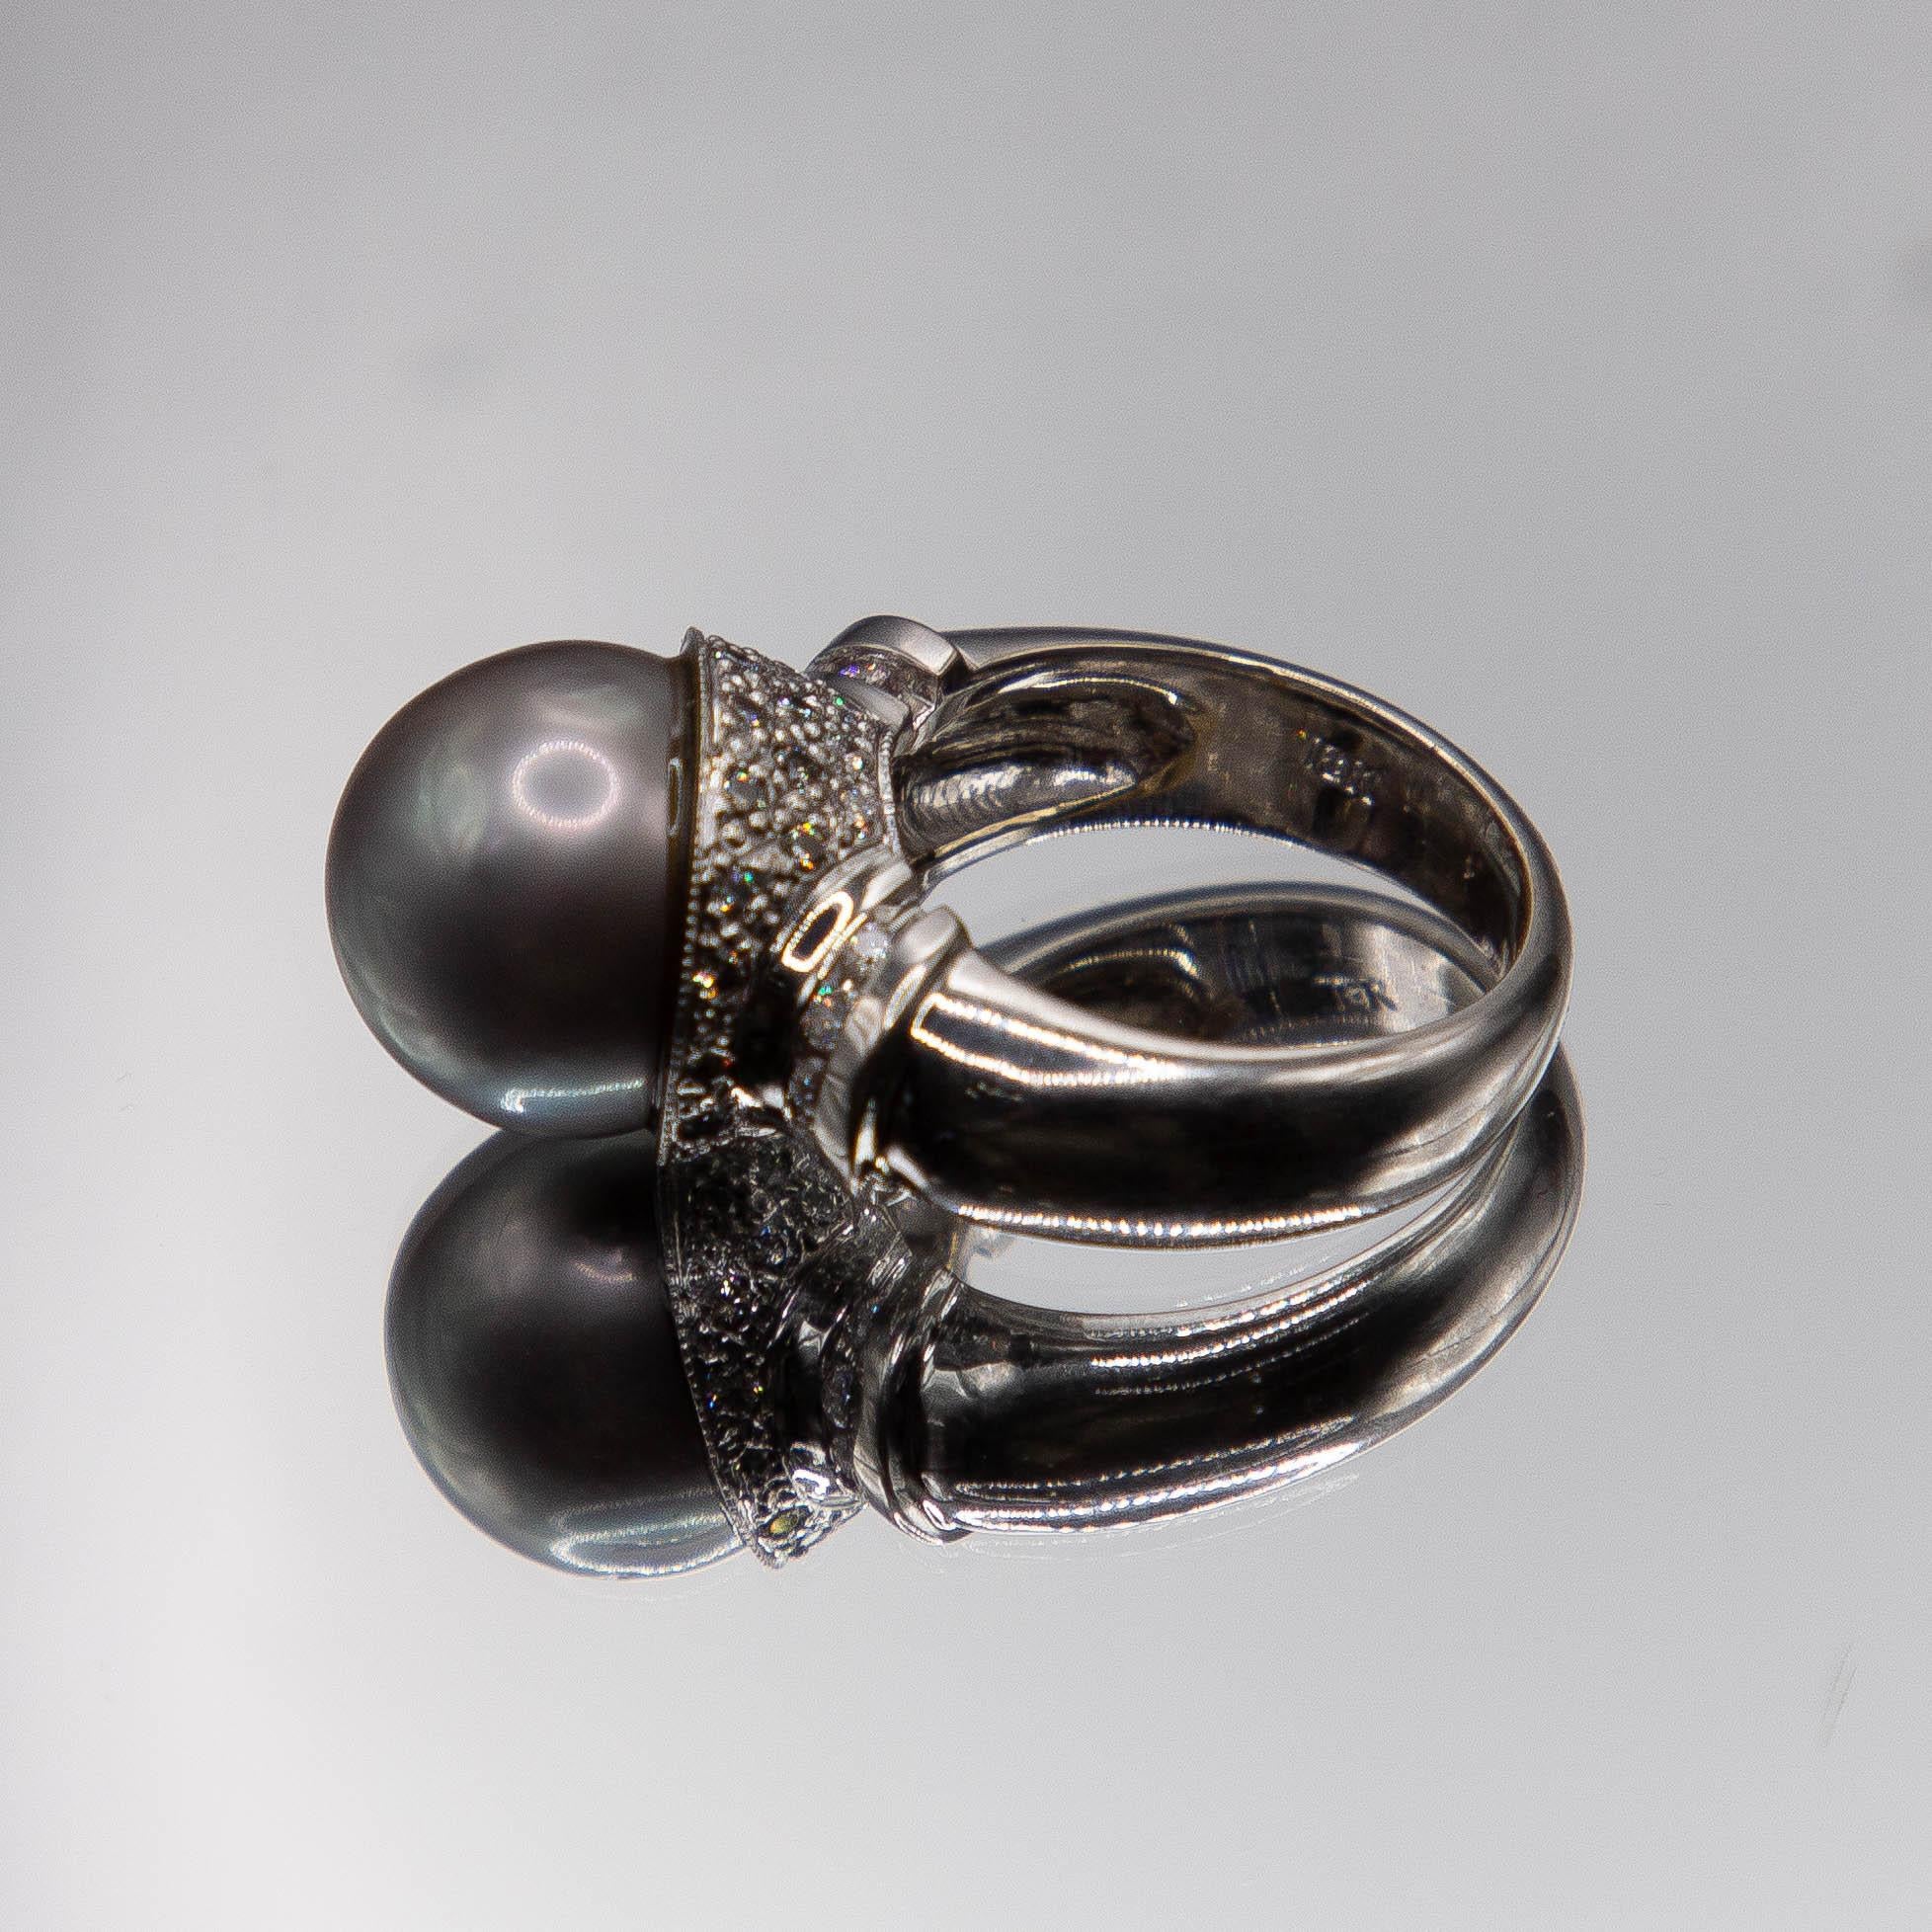 The high polish 18k white gold ring features a fine 14mm Tahitian South Sea pearl. Center gem has very good roundness, very high luster, strong orient, good blemishing, thick nacre,  body color of a slate grayish- black and Peacock overtone . The